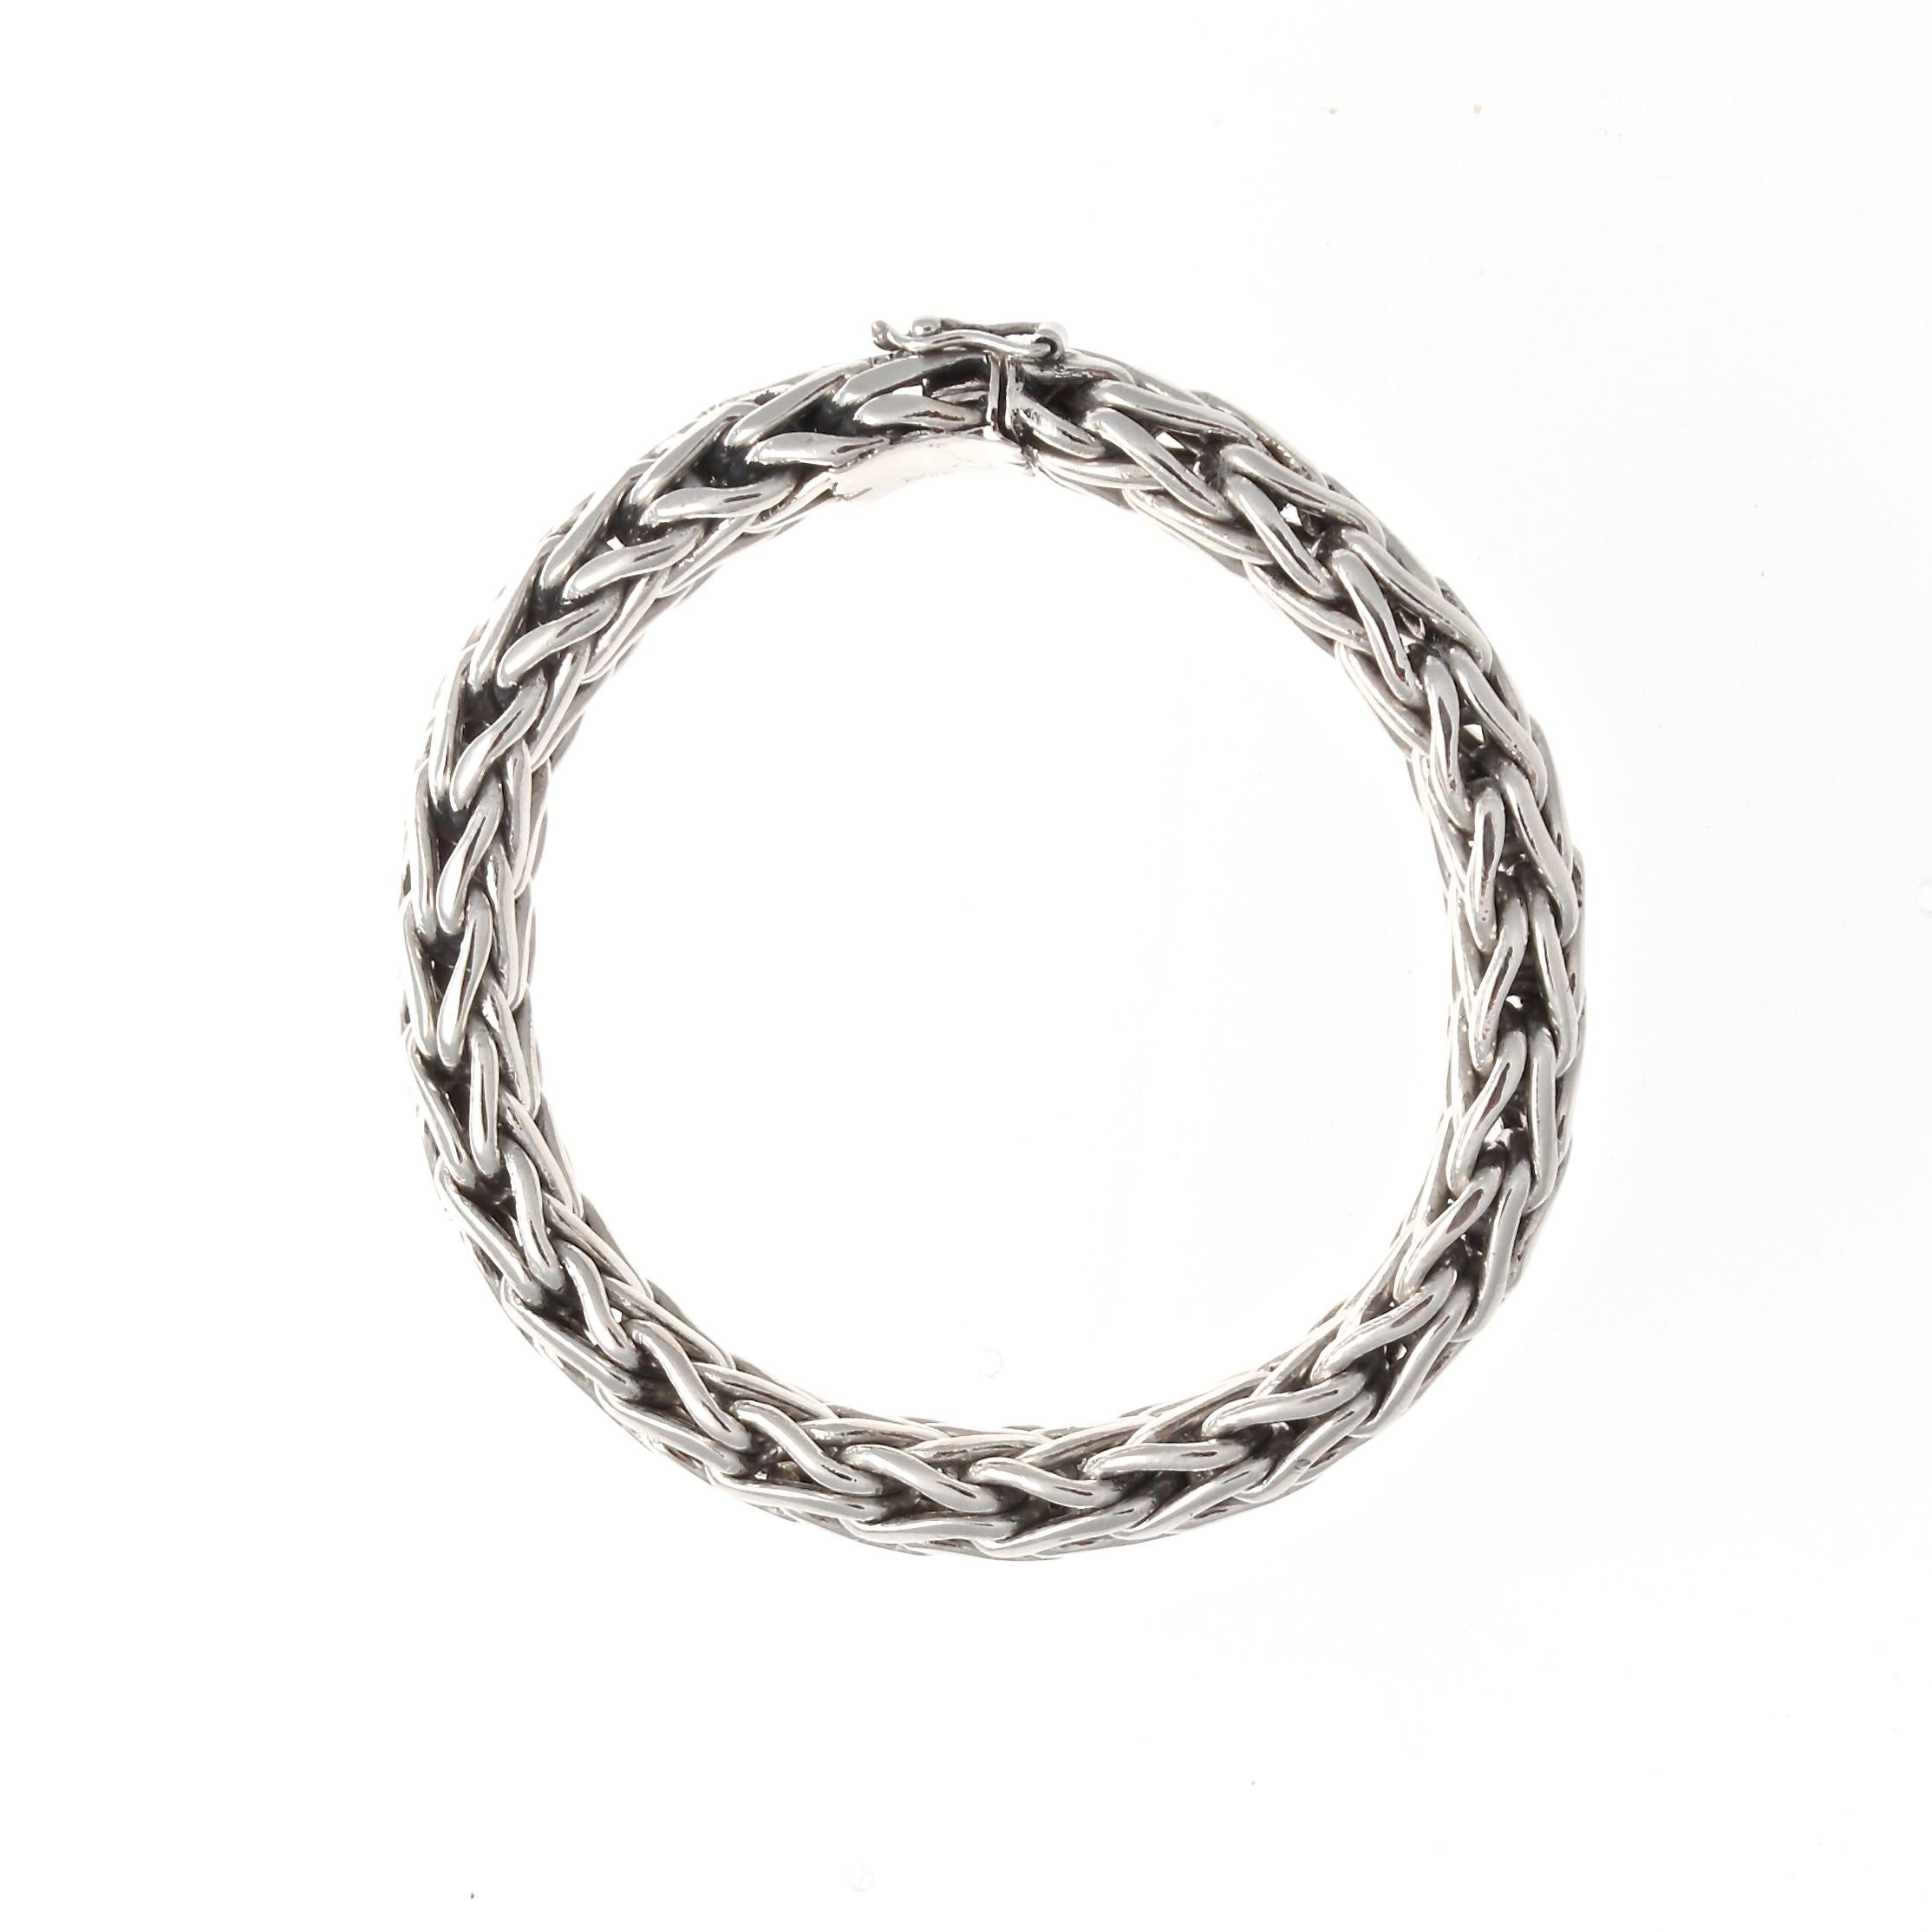 Simplicity is the essence of all true elegance. Designed in woven platinum. Weighs 150 grams.